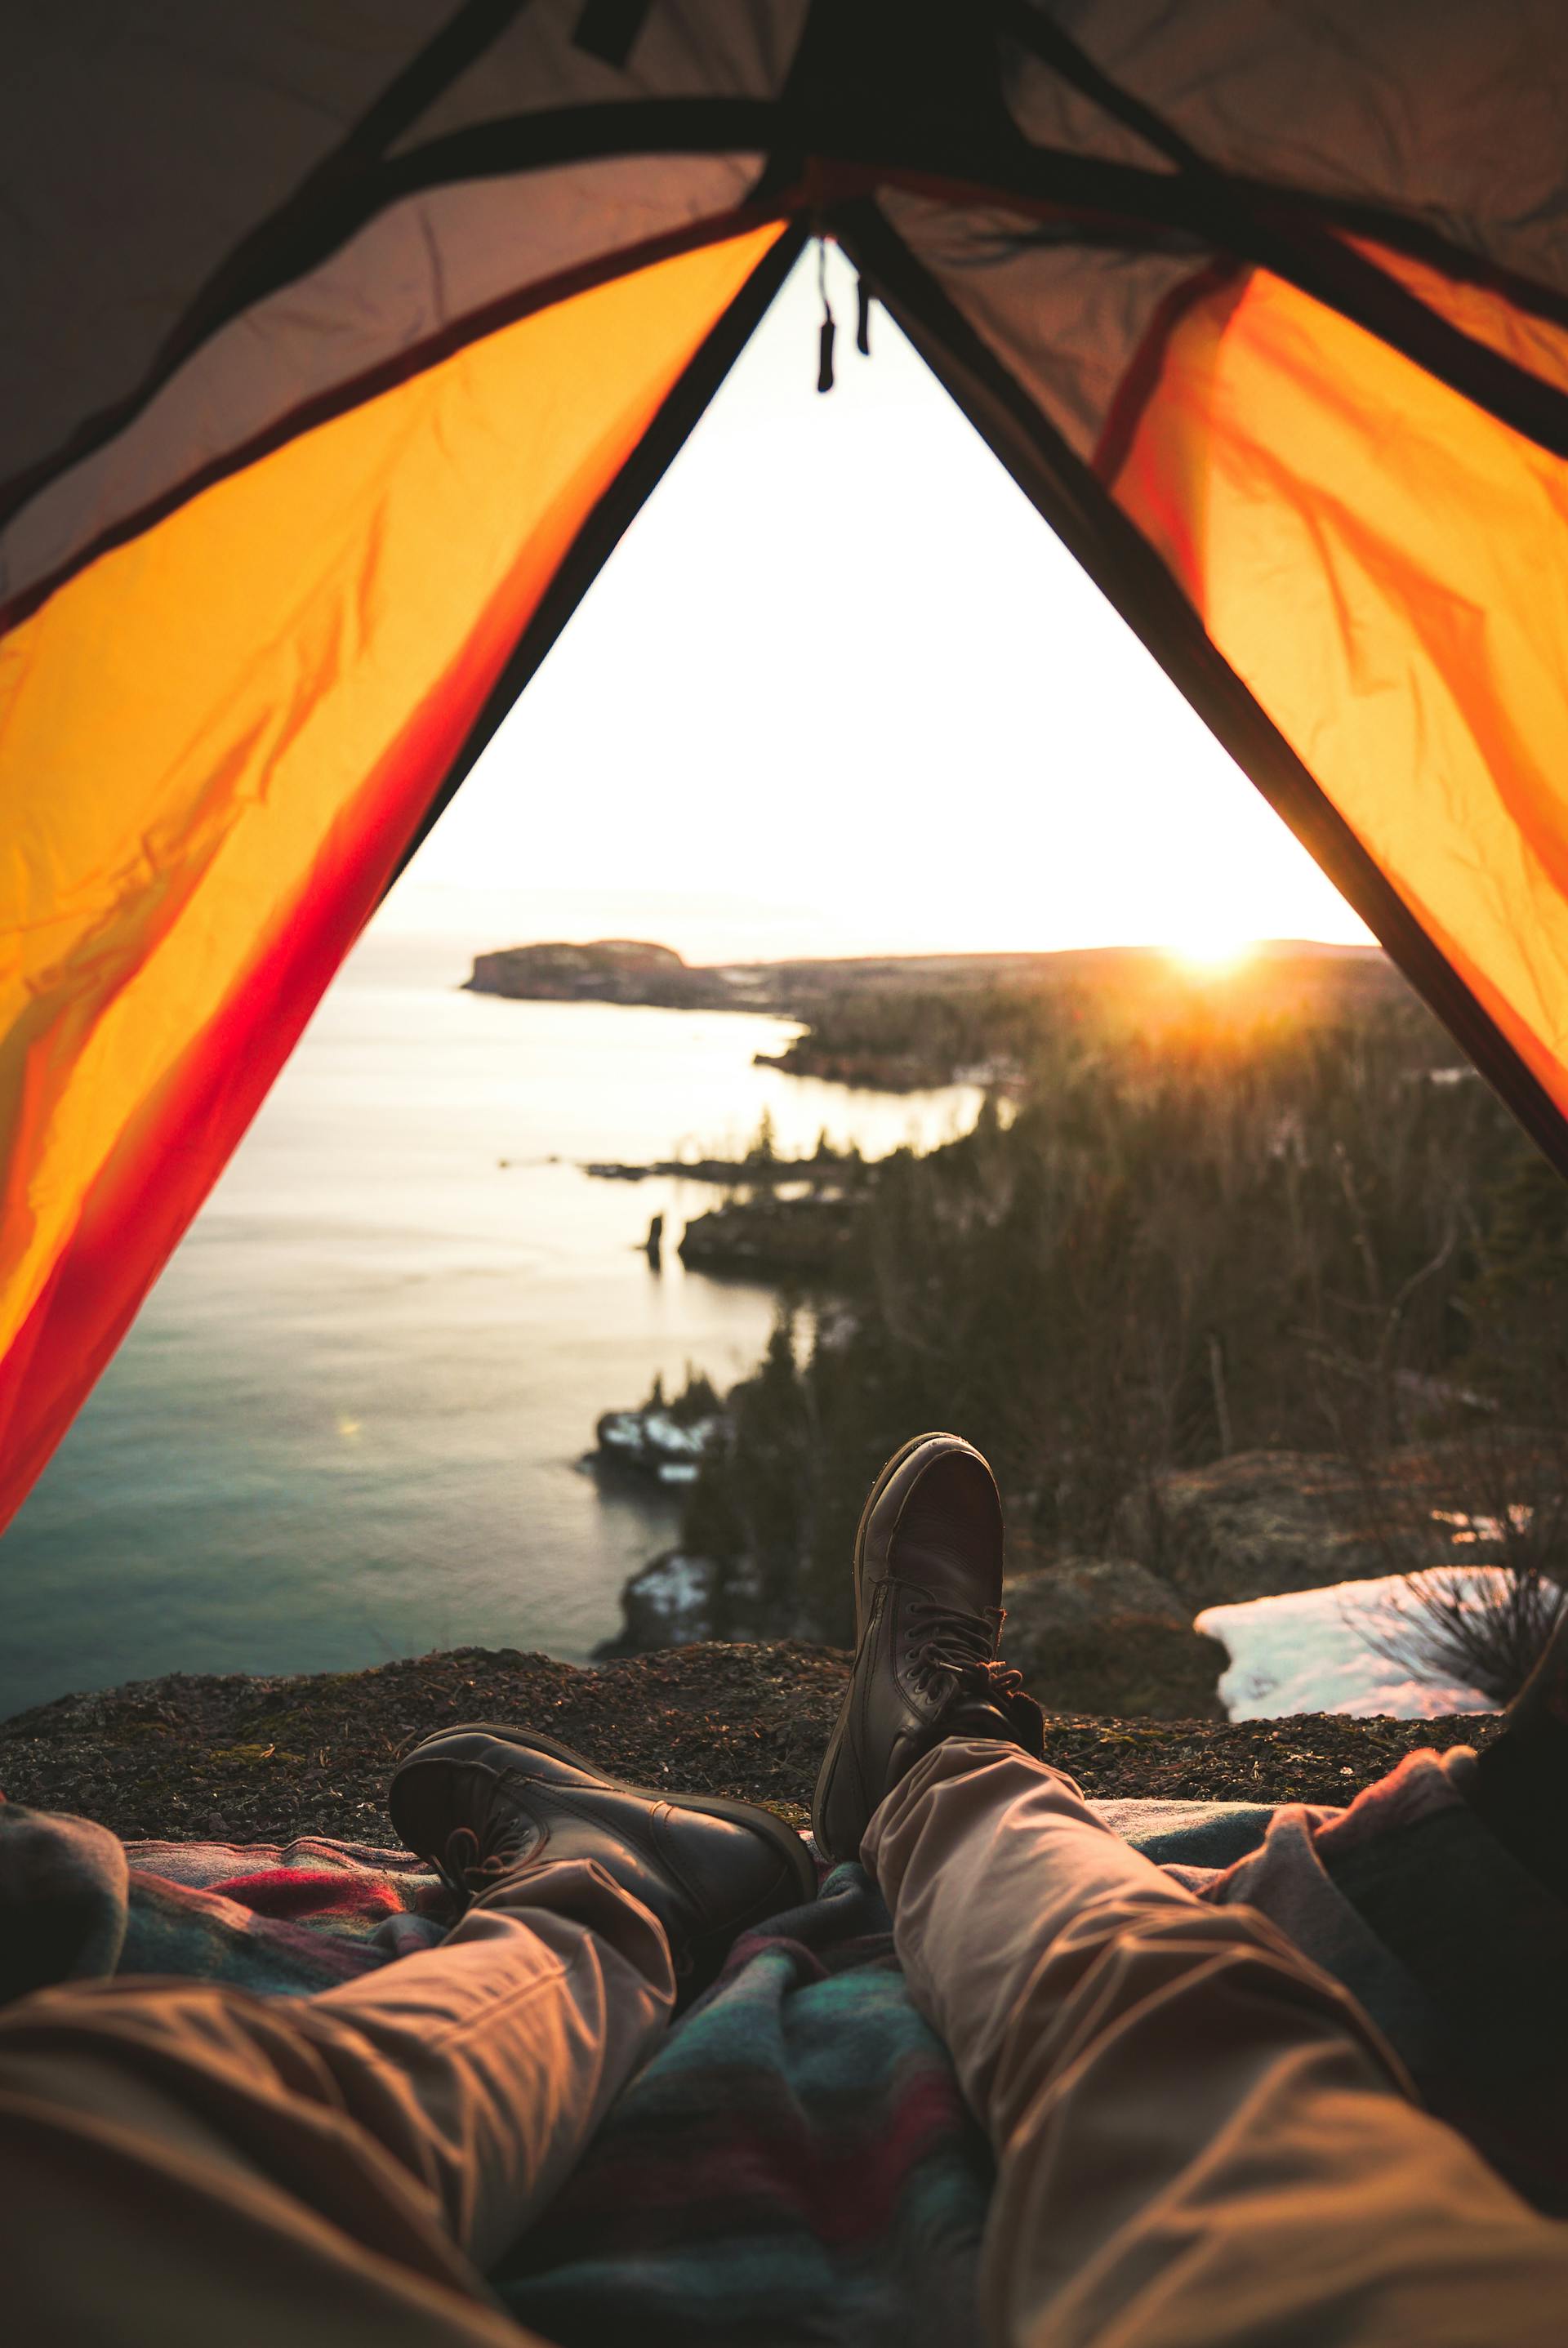 A tourist lying in a camping tent near a shore | Source: Pexels